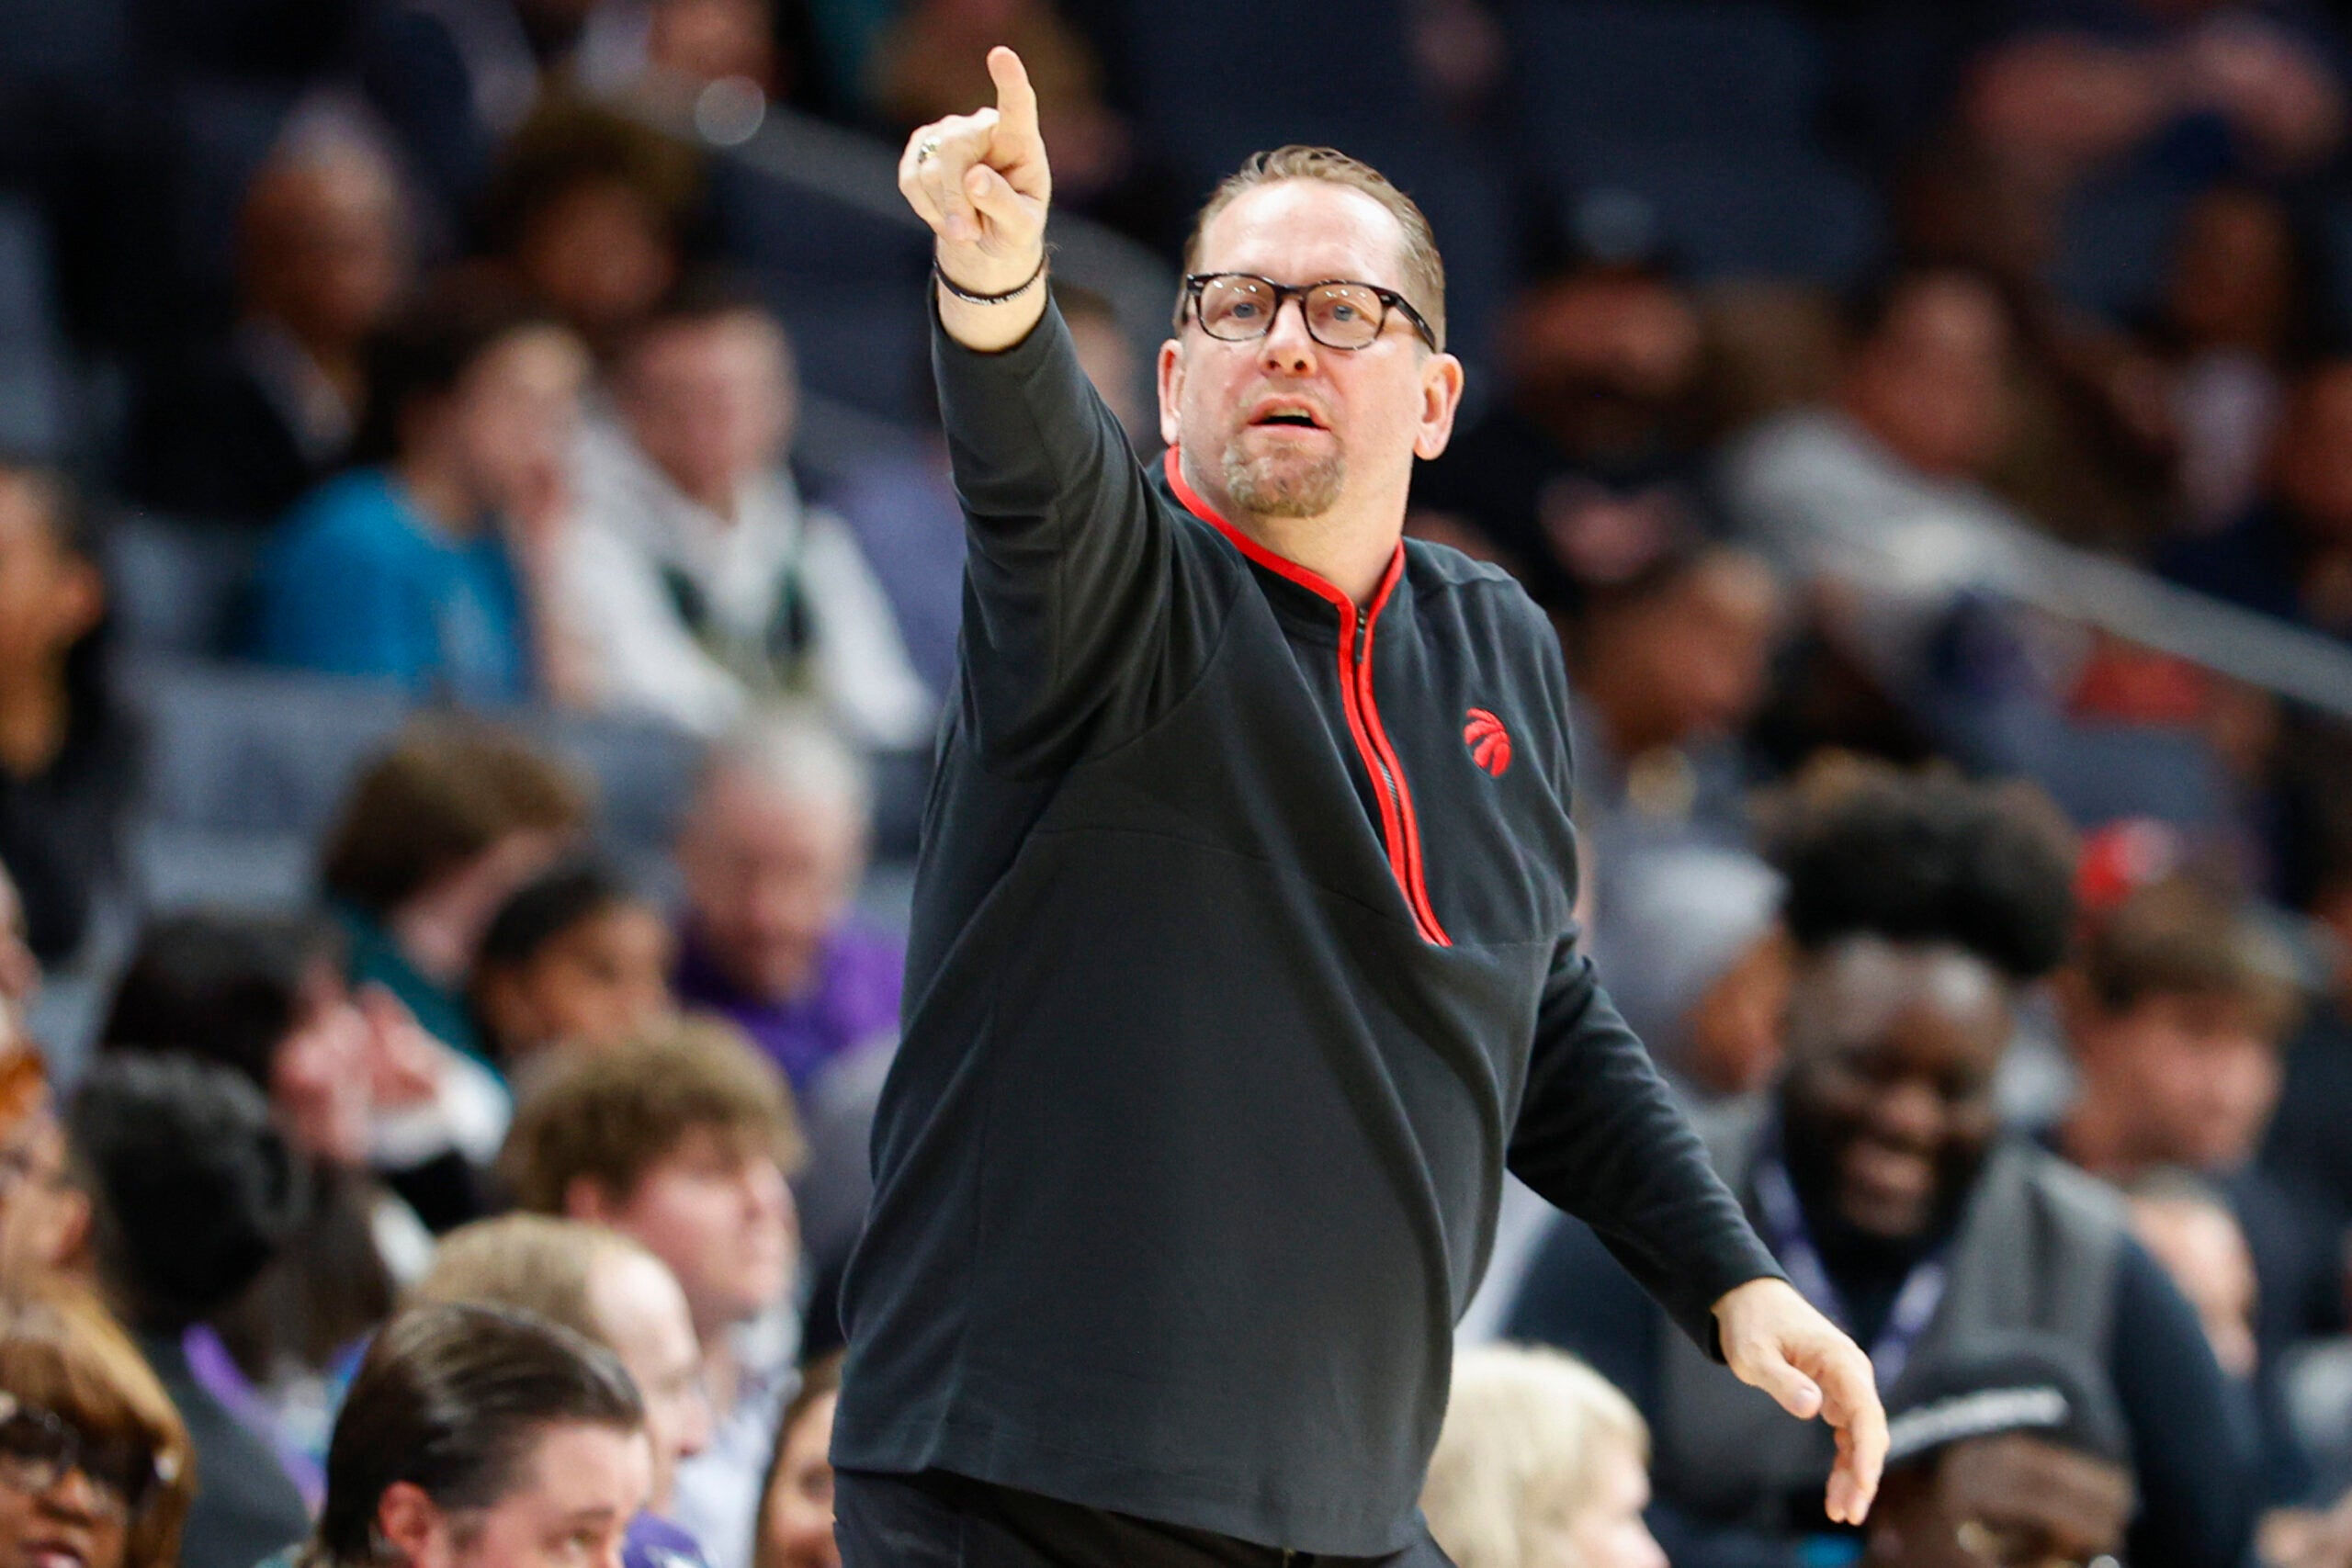 Toronto Raptors head coach Nick Nurse directs his team during the first half of an NBA basketball game against the Charlotte Hornets.